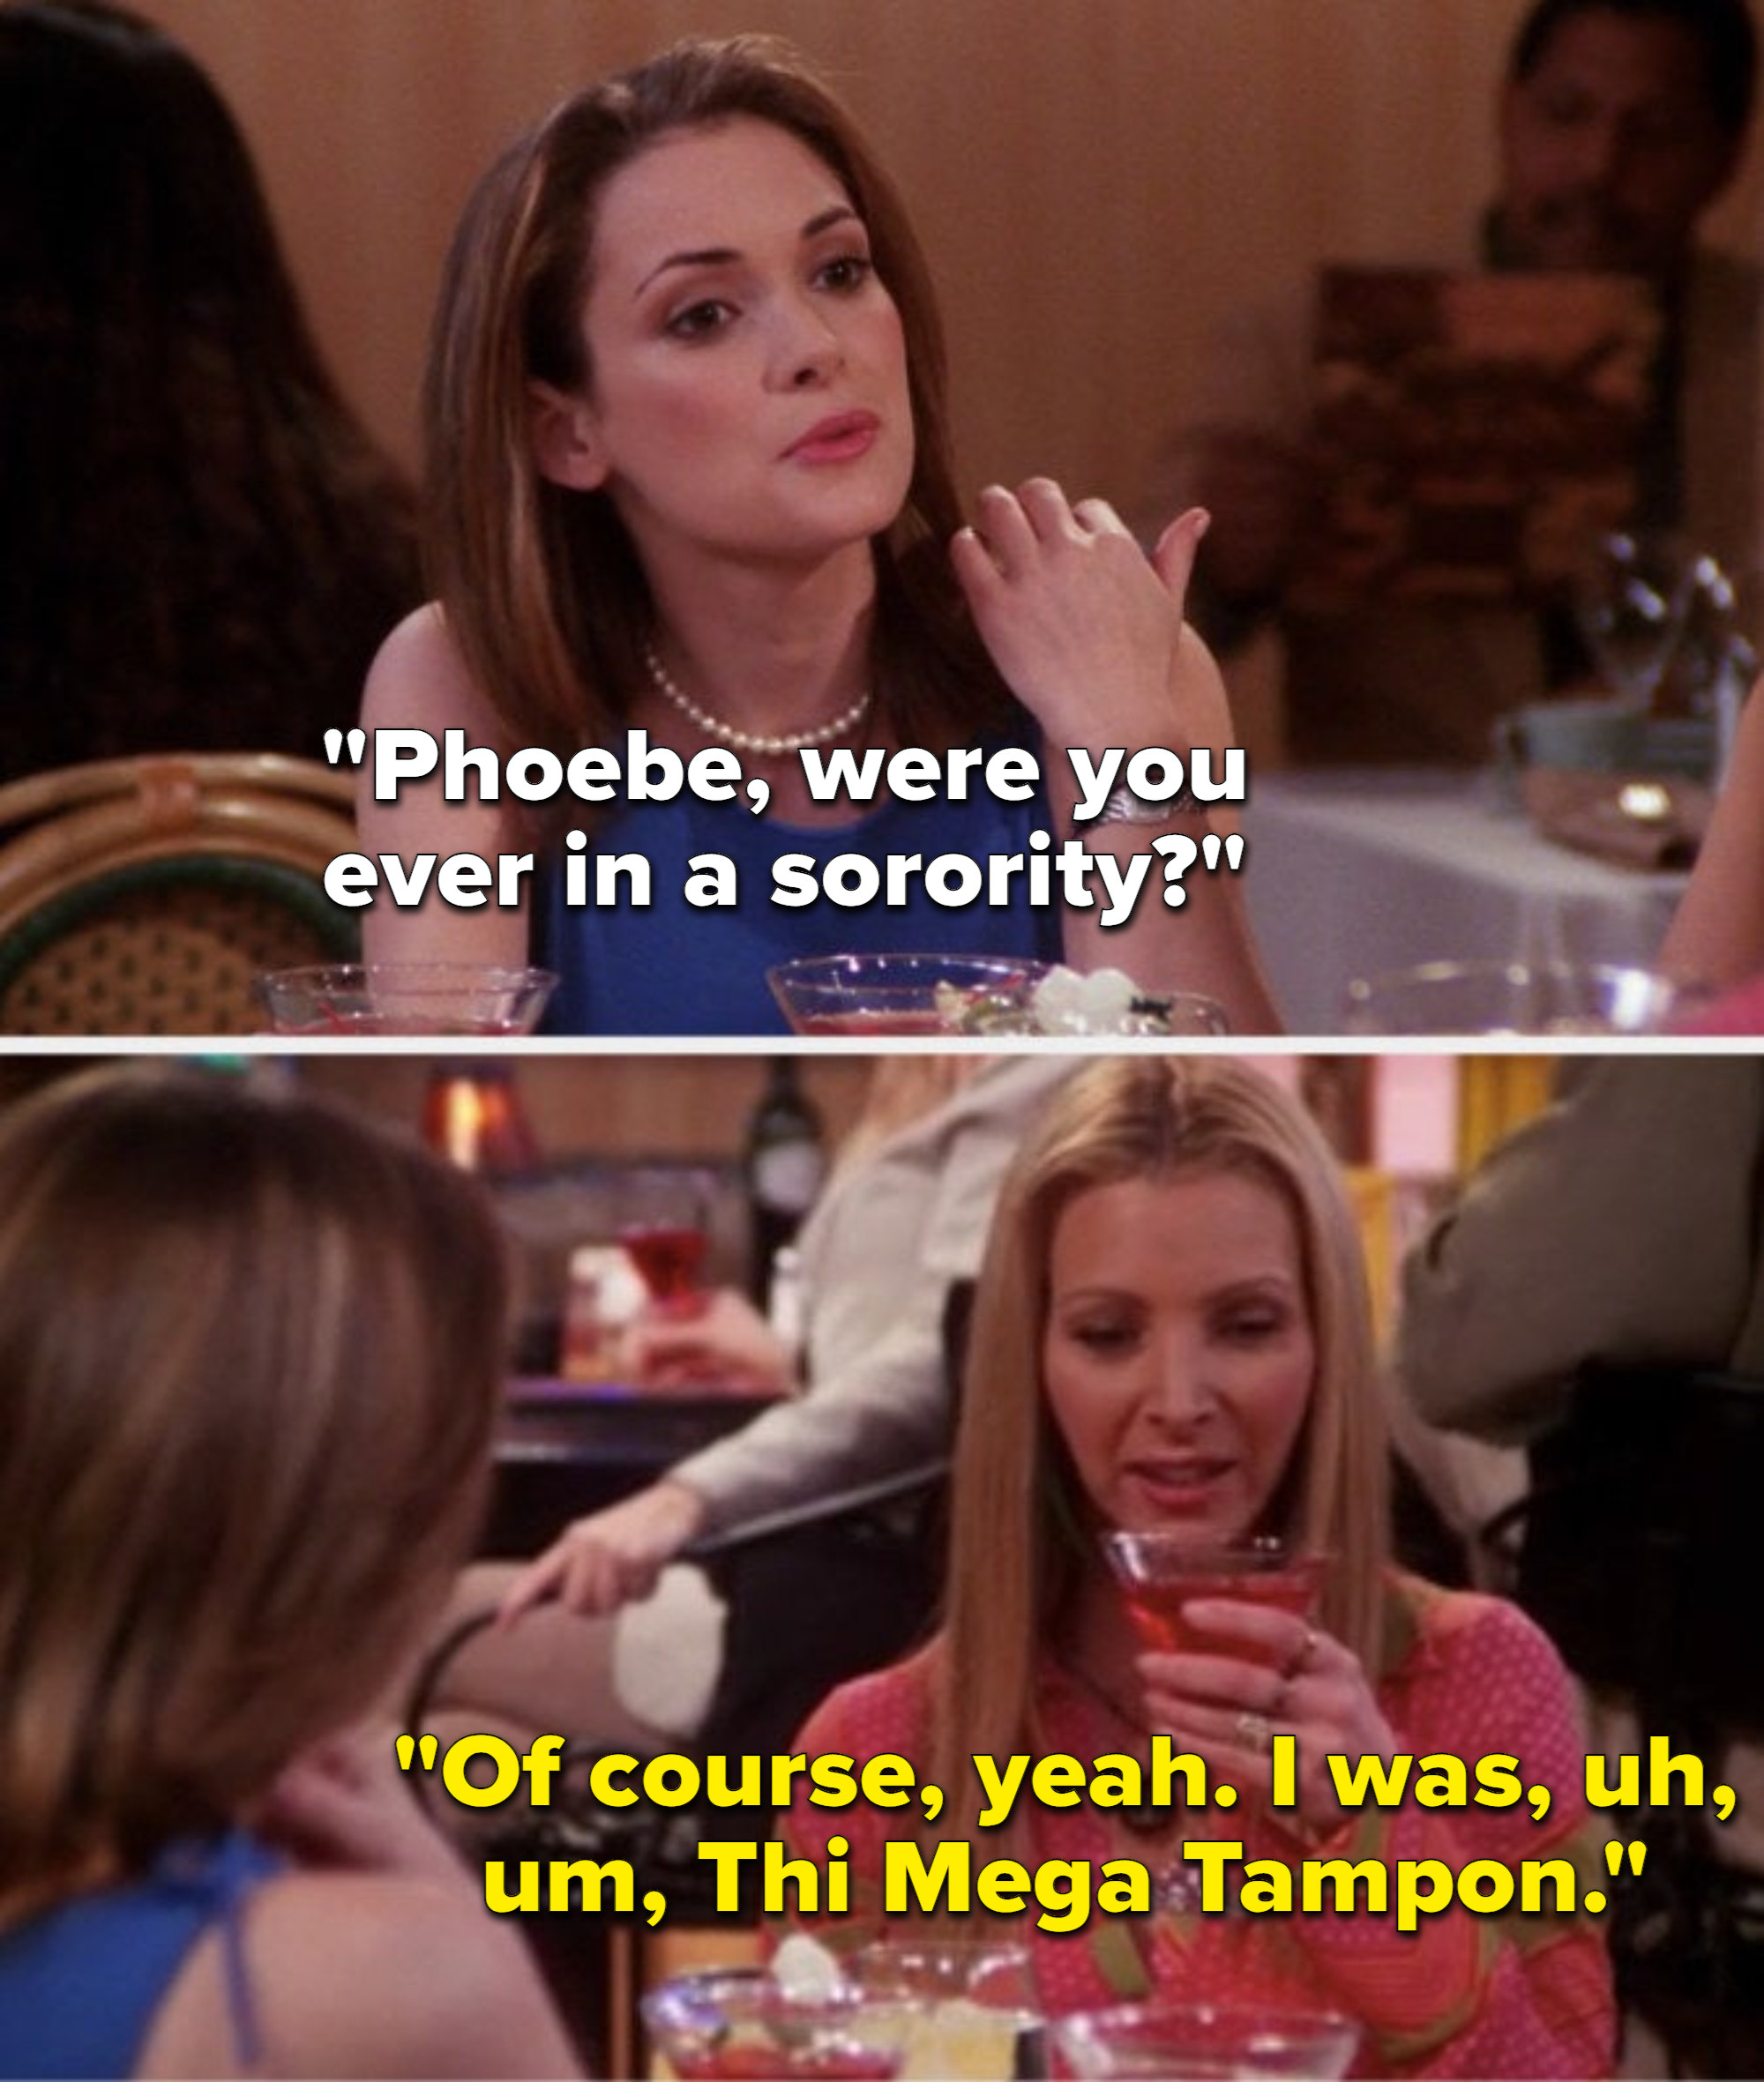 Melissa says, Phoebe, were you ever in a sorority, and Phoebe says, Of course, yeah, I was, uh, um, Thi Mega Tampon